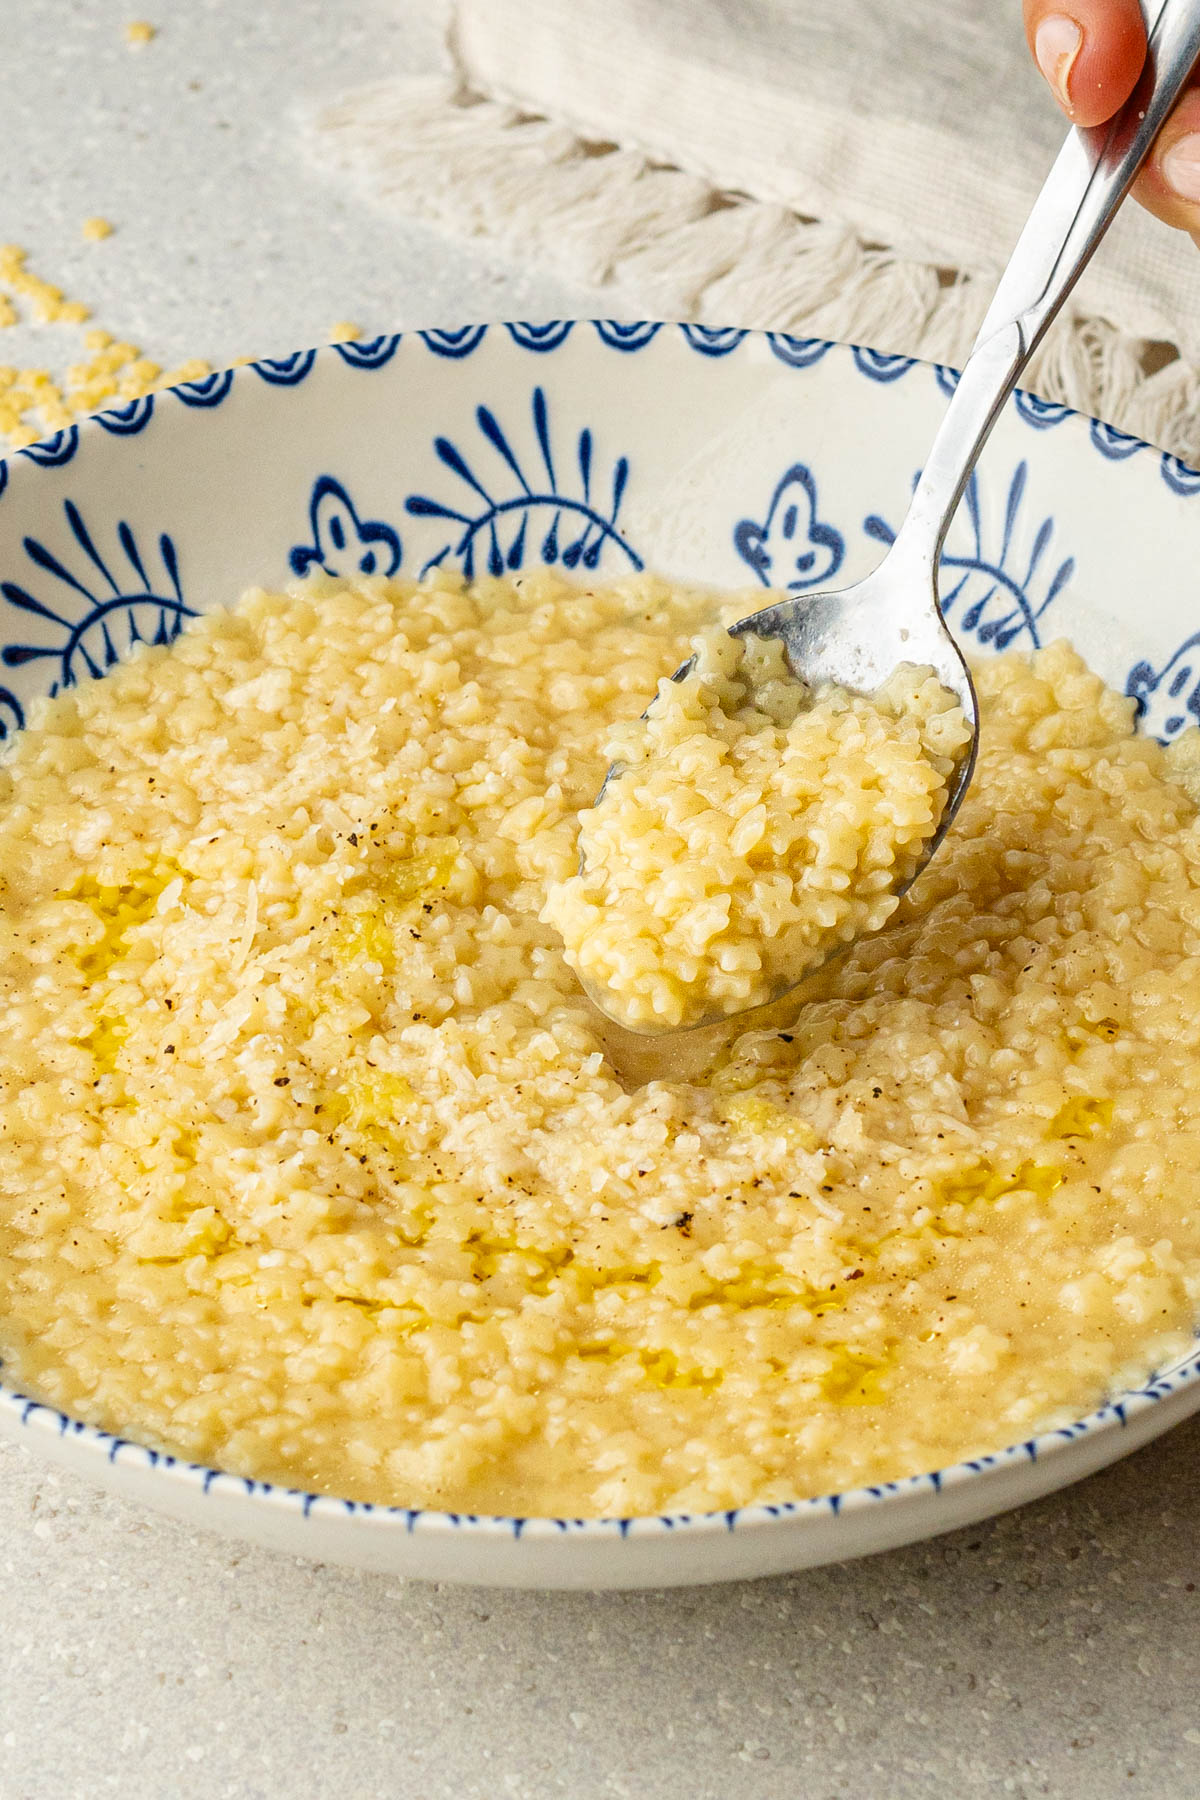 Spoon of Italian pastina in a bowl